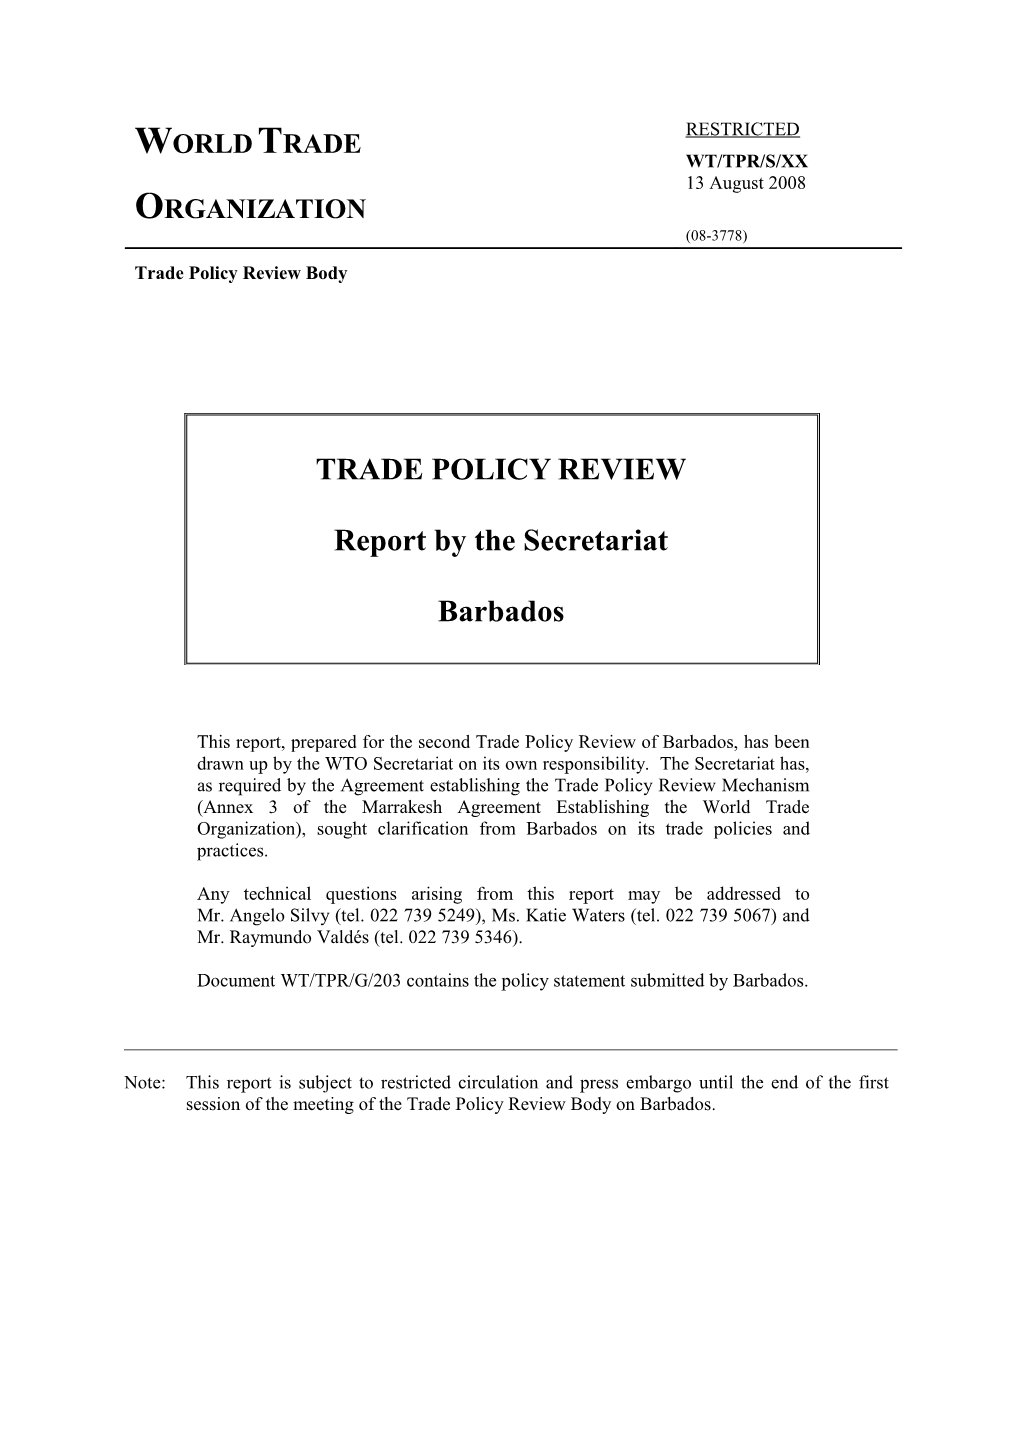 Report by the Secretariat s19